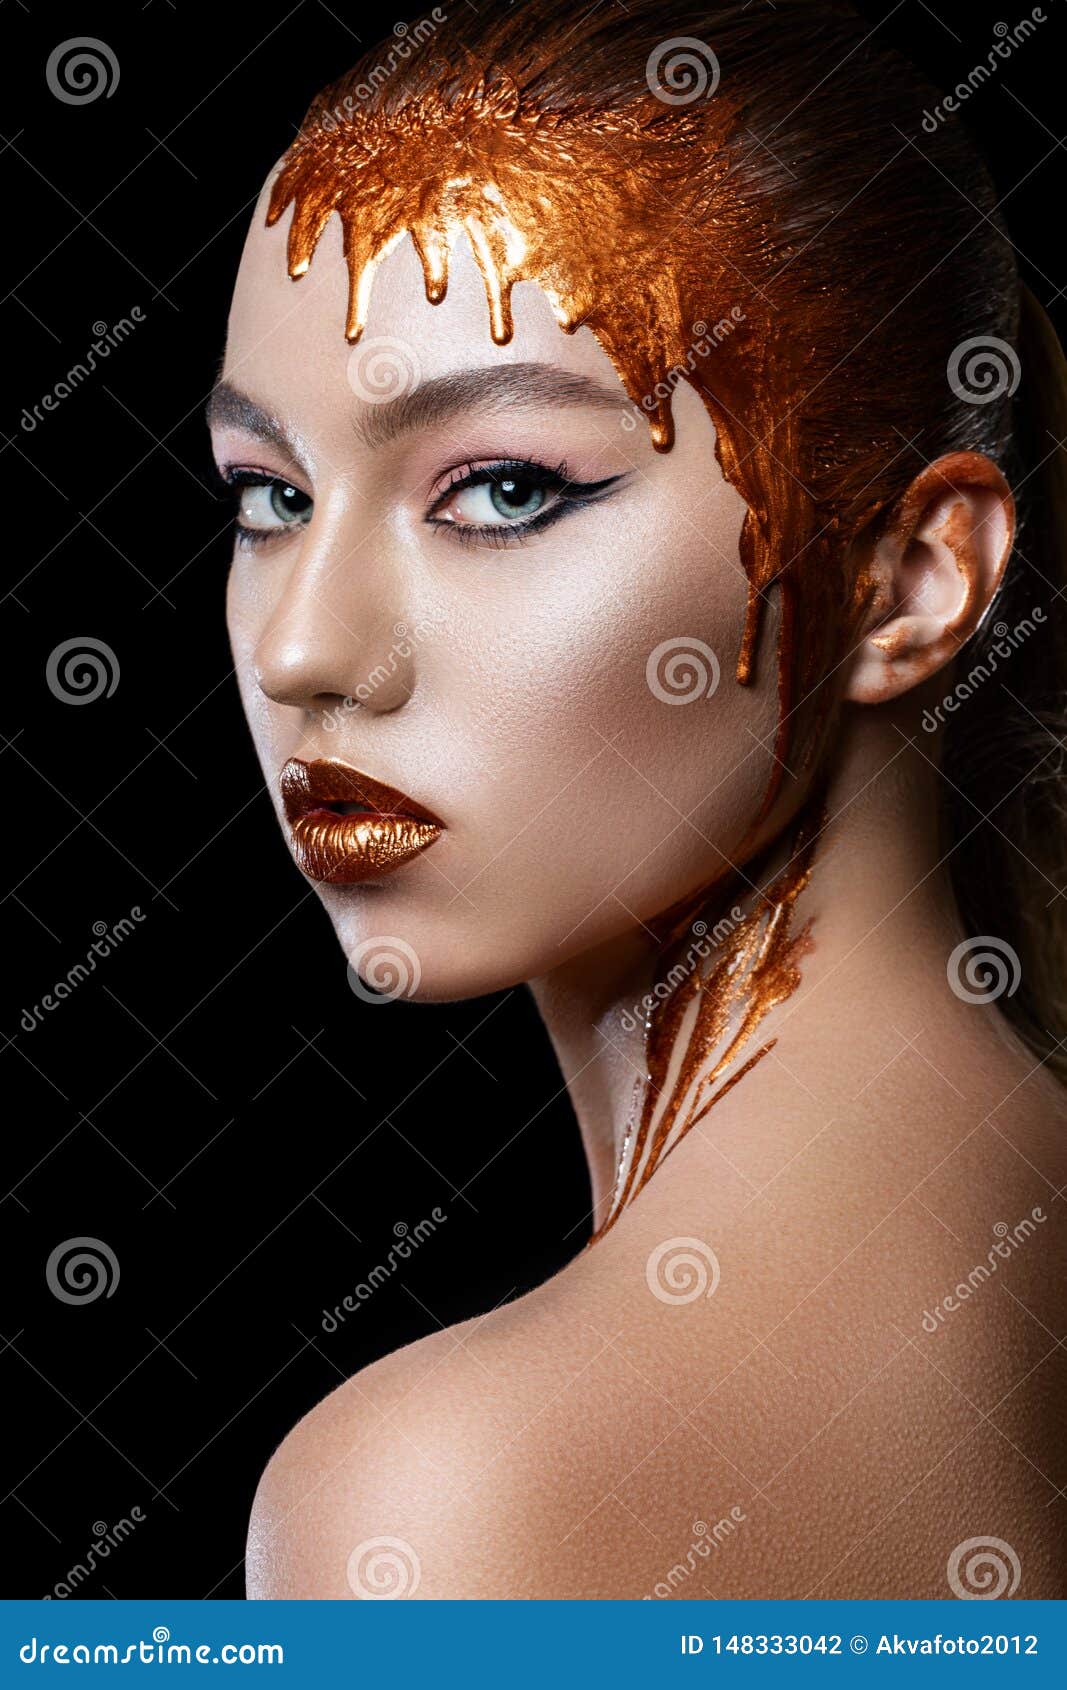 gold colors flow down from the lips, face and neck of a beautiful model girl, creative abstract makeup.